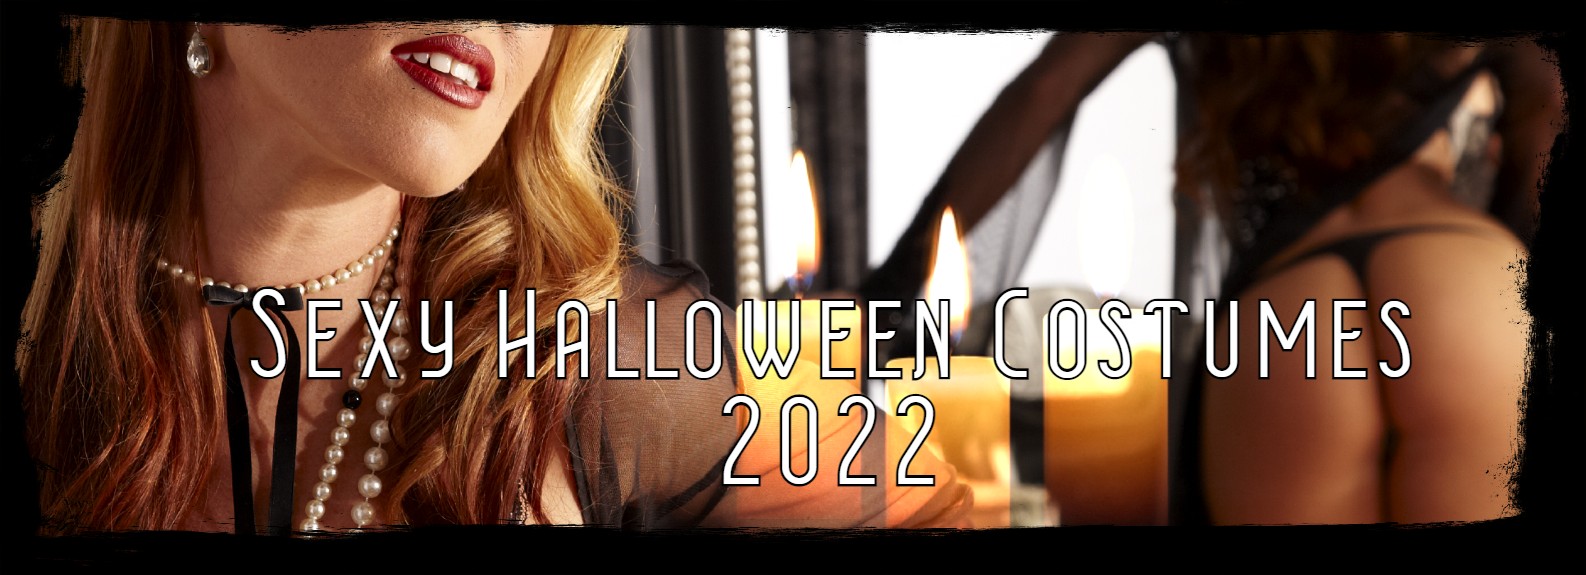 Sexy Halloween Costumes 2022 intro banner